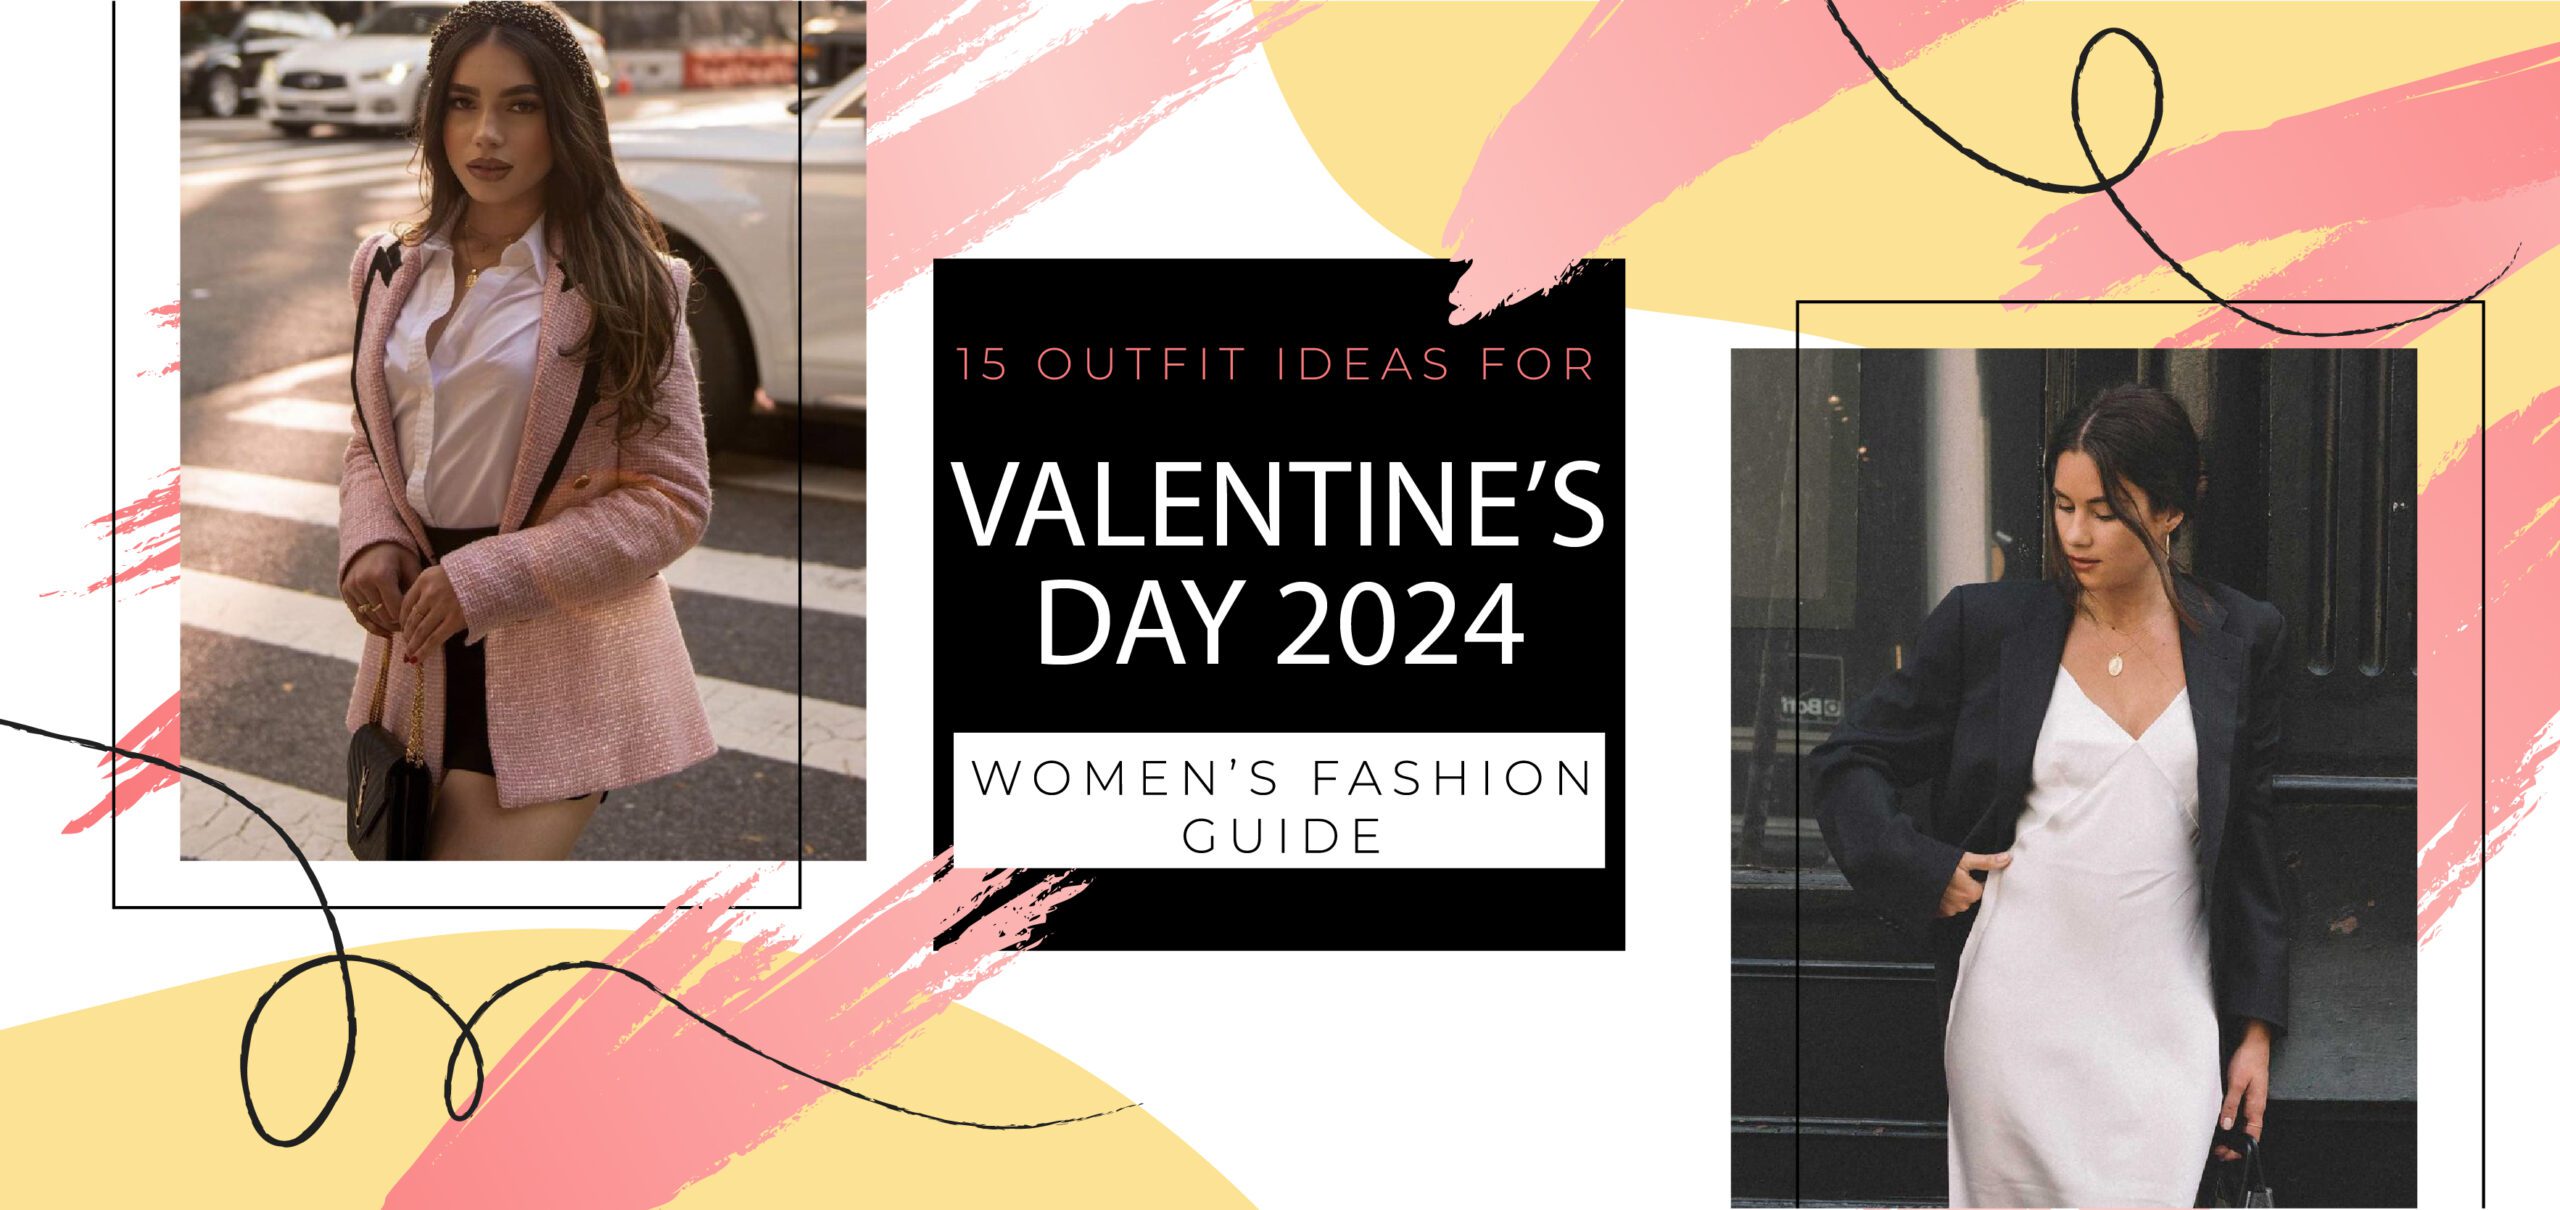 15 outfit ideas for valentine's day 2024 Women's fashion guide